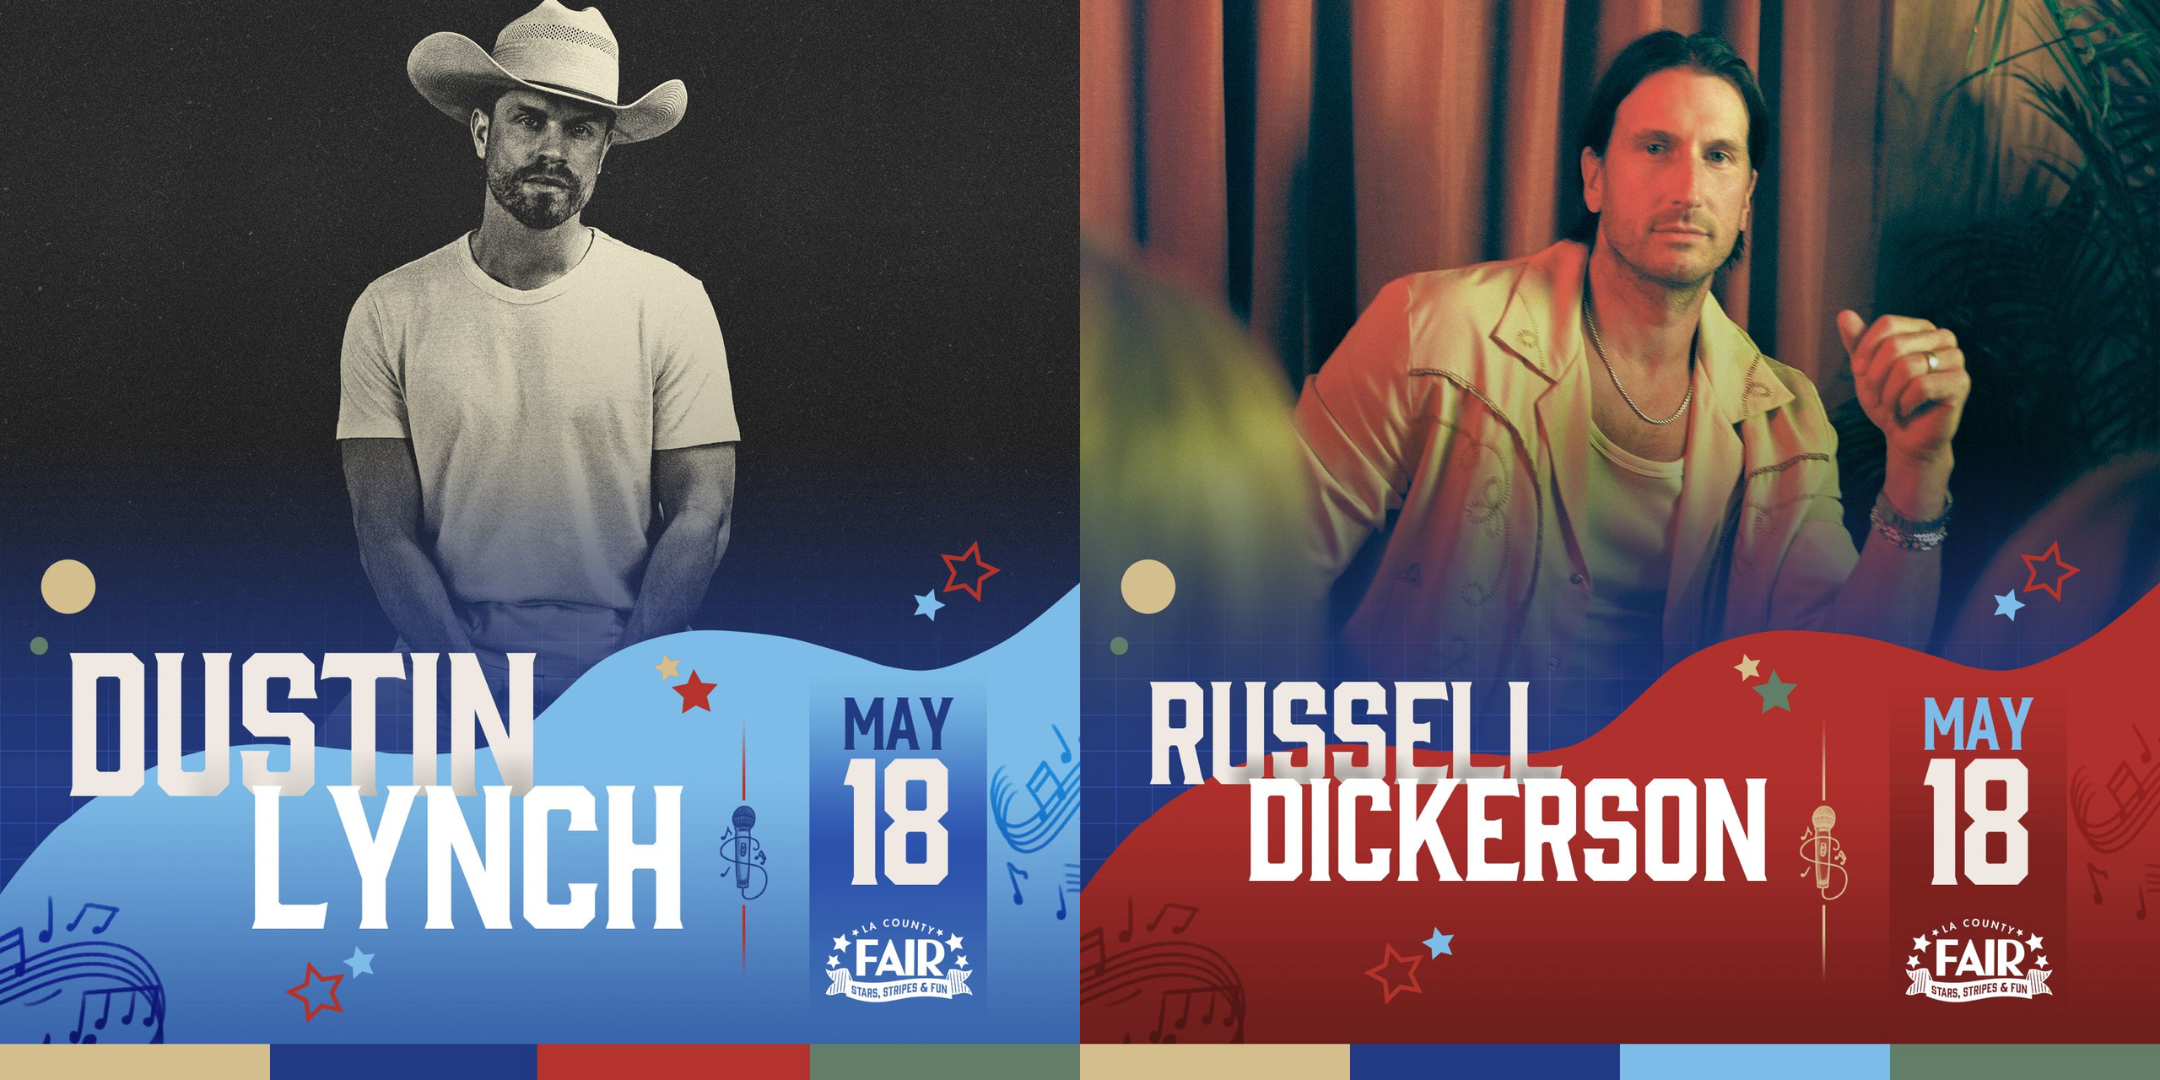 Know Before You Go: Dustin Lynch & Russel Dickerson Concert